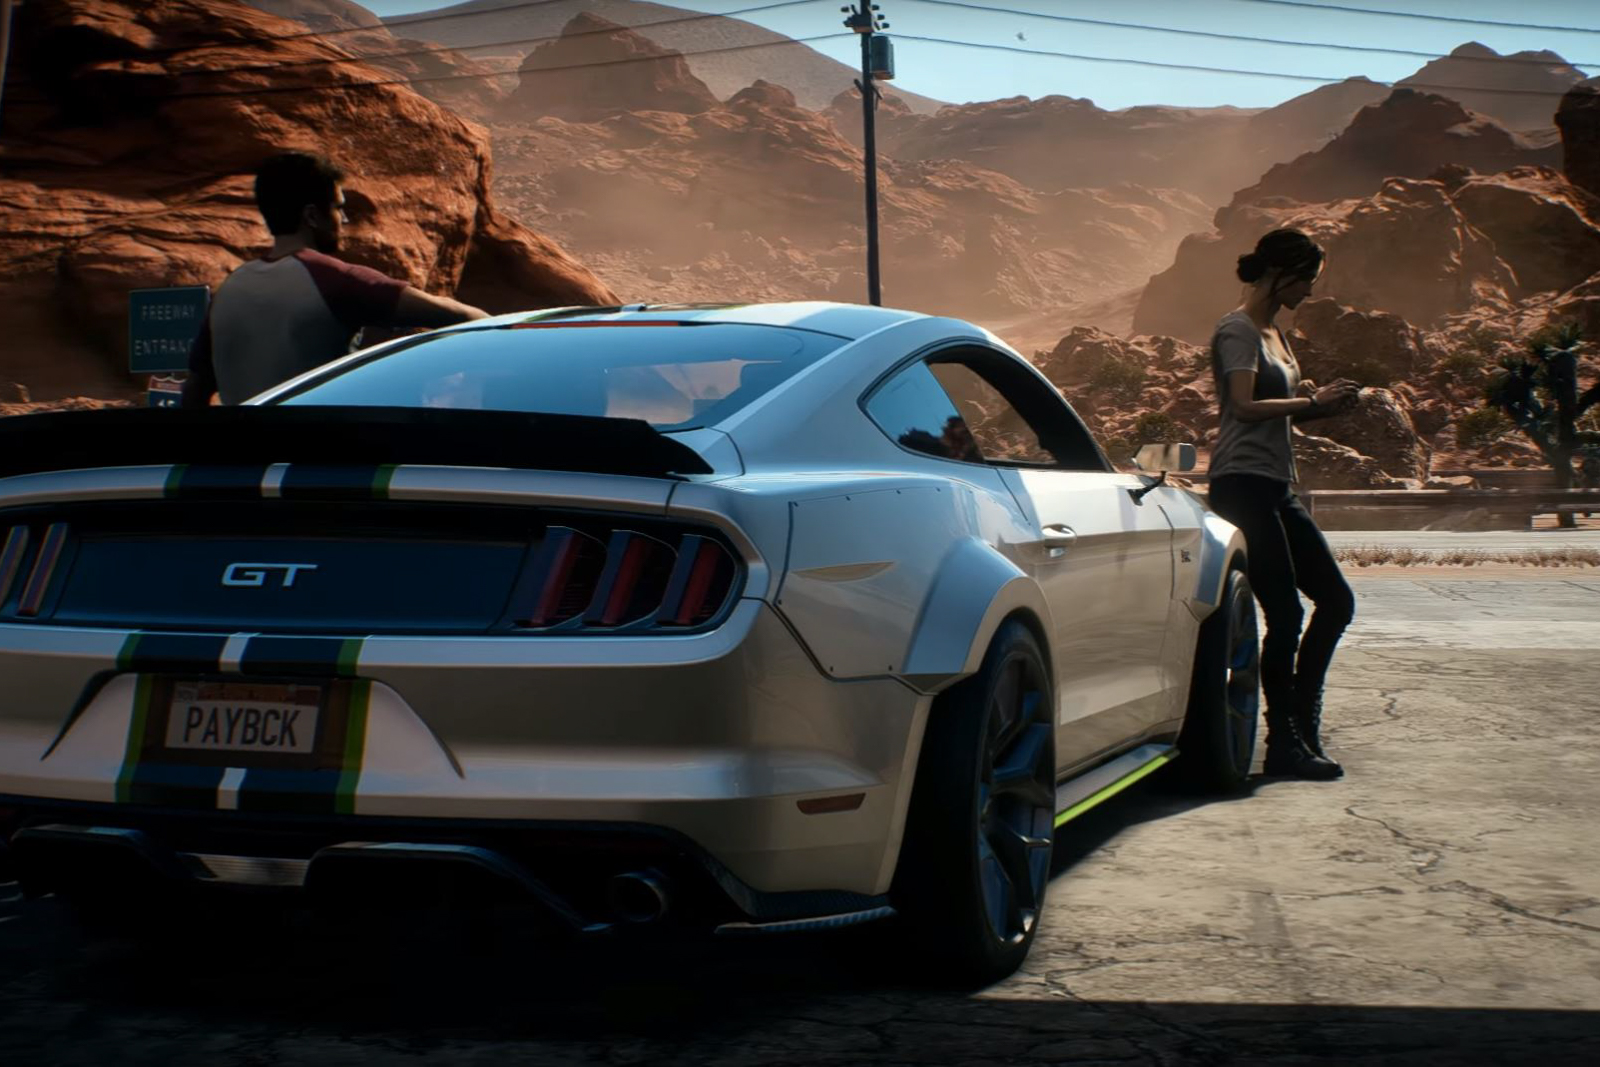 Need for speed playback. Ford Mustang NFS Payback. Need for Speed Payback Ford Mustang. NFS Payback Форд Мустанг. Ford Mustang RTR 2015 Payback.